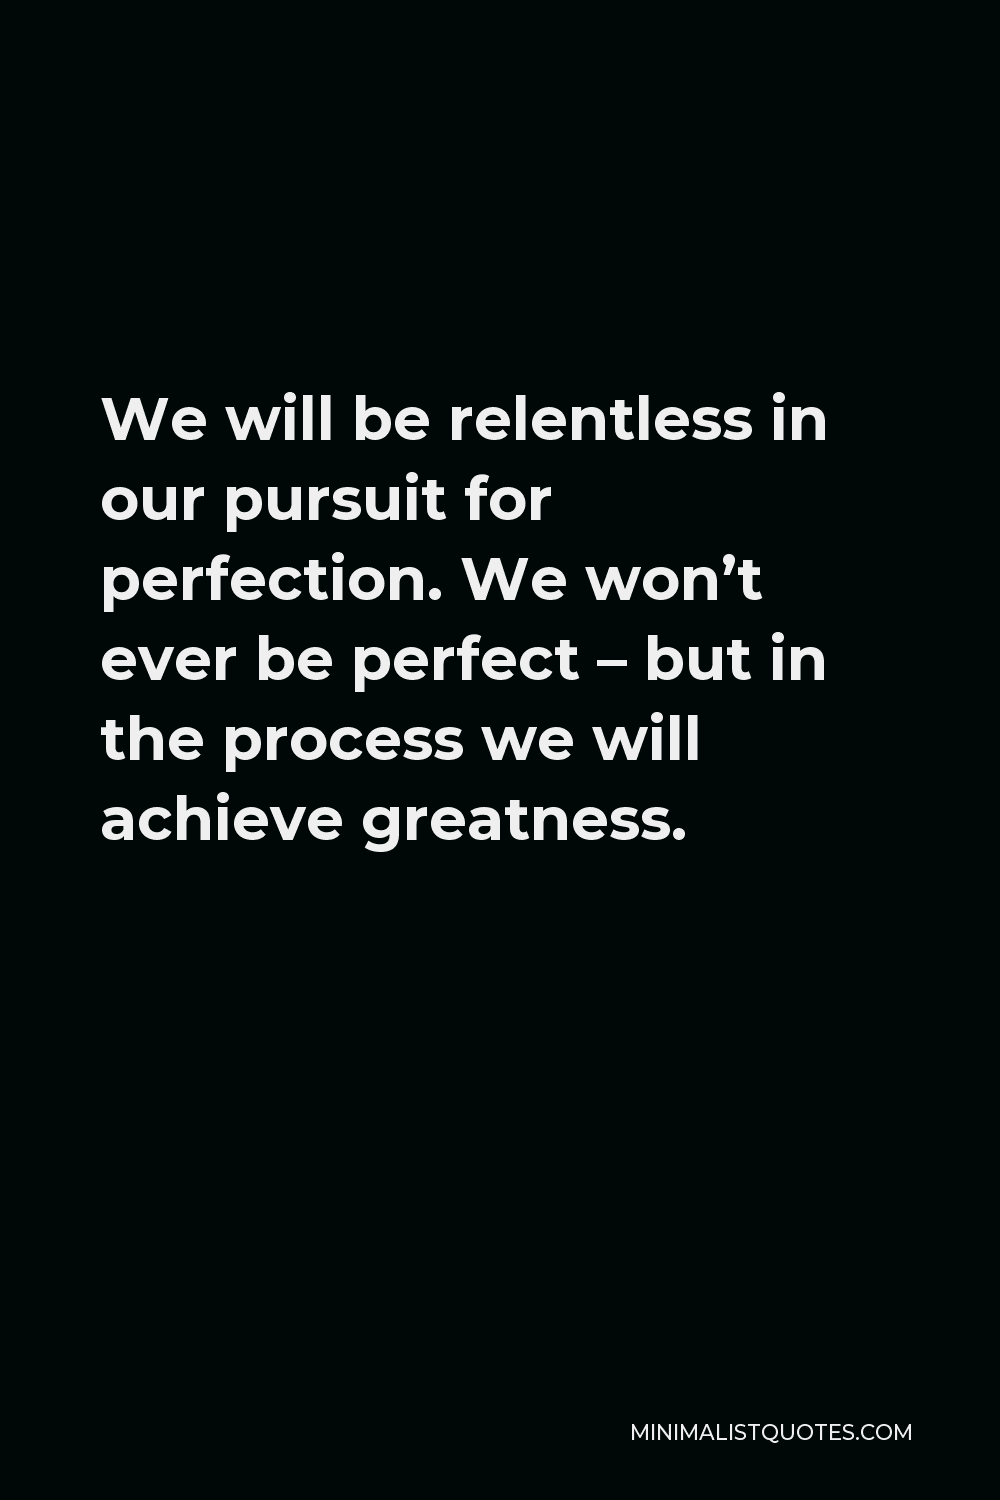 Vince Lombardi Quote We Will Be Relentless In Our Pursuit For Perfection We Won T Ever Be Perfect But In The Process We Will Achieve Greatness